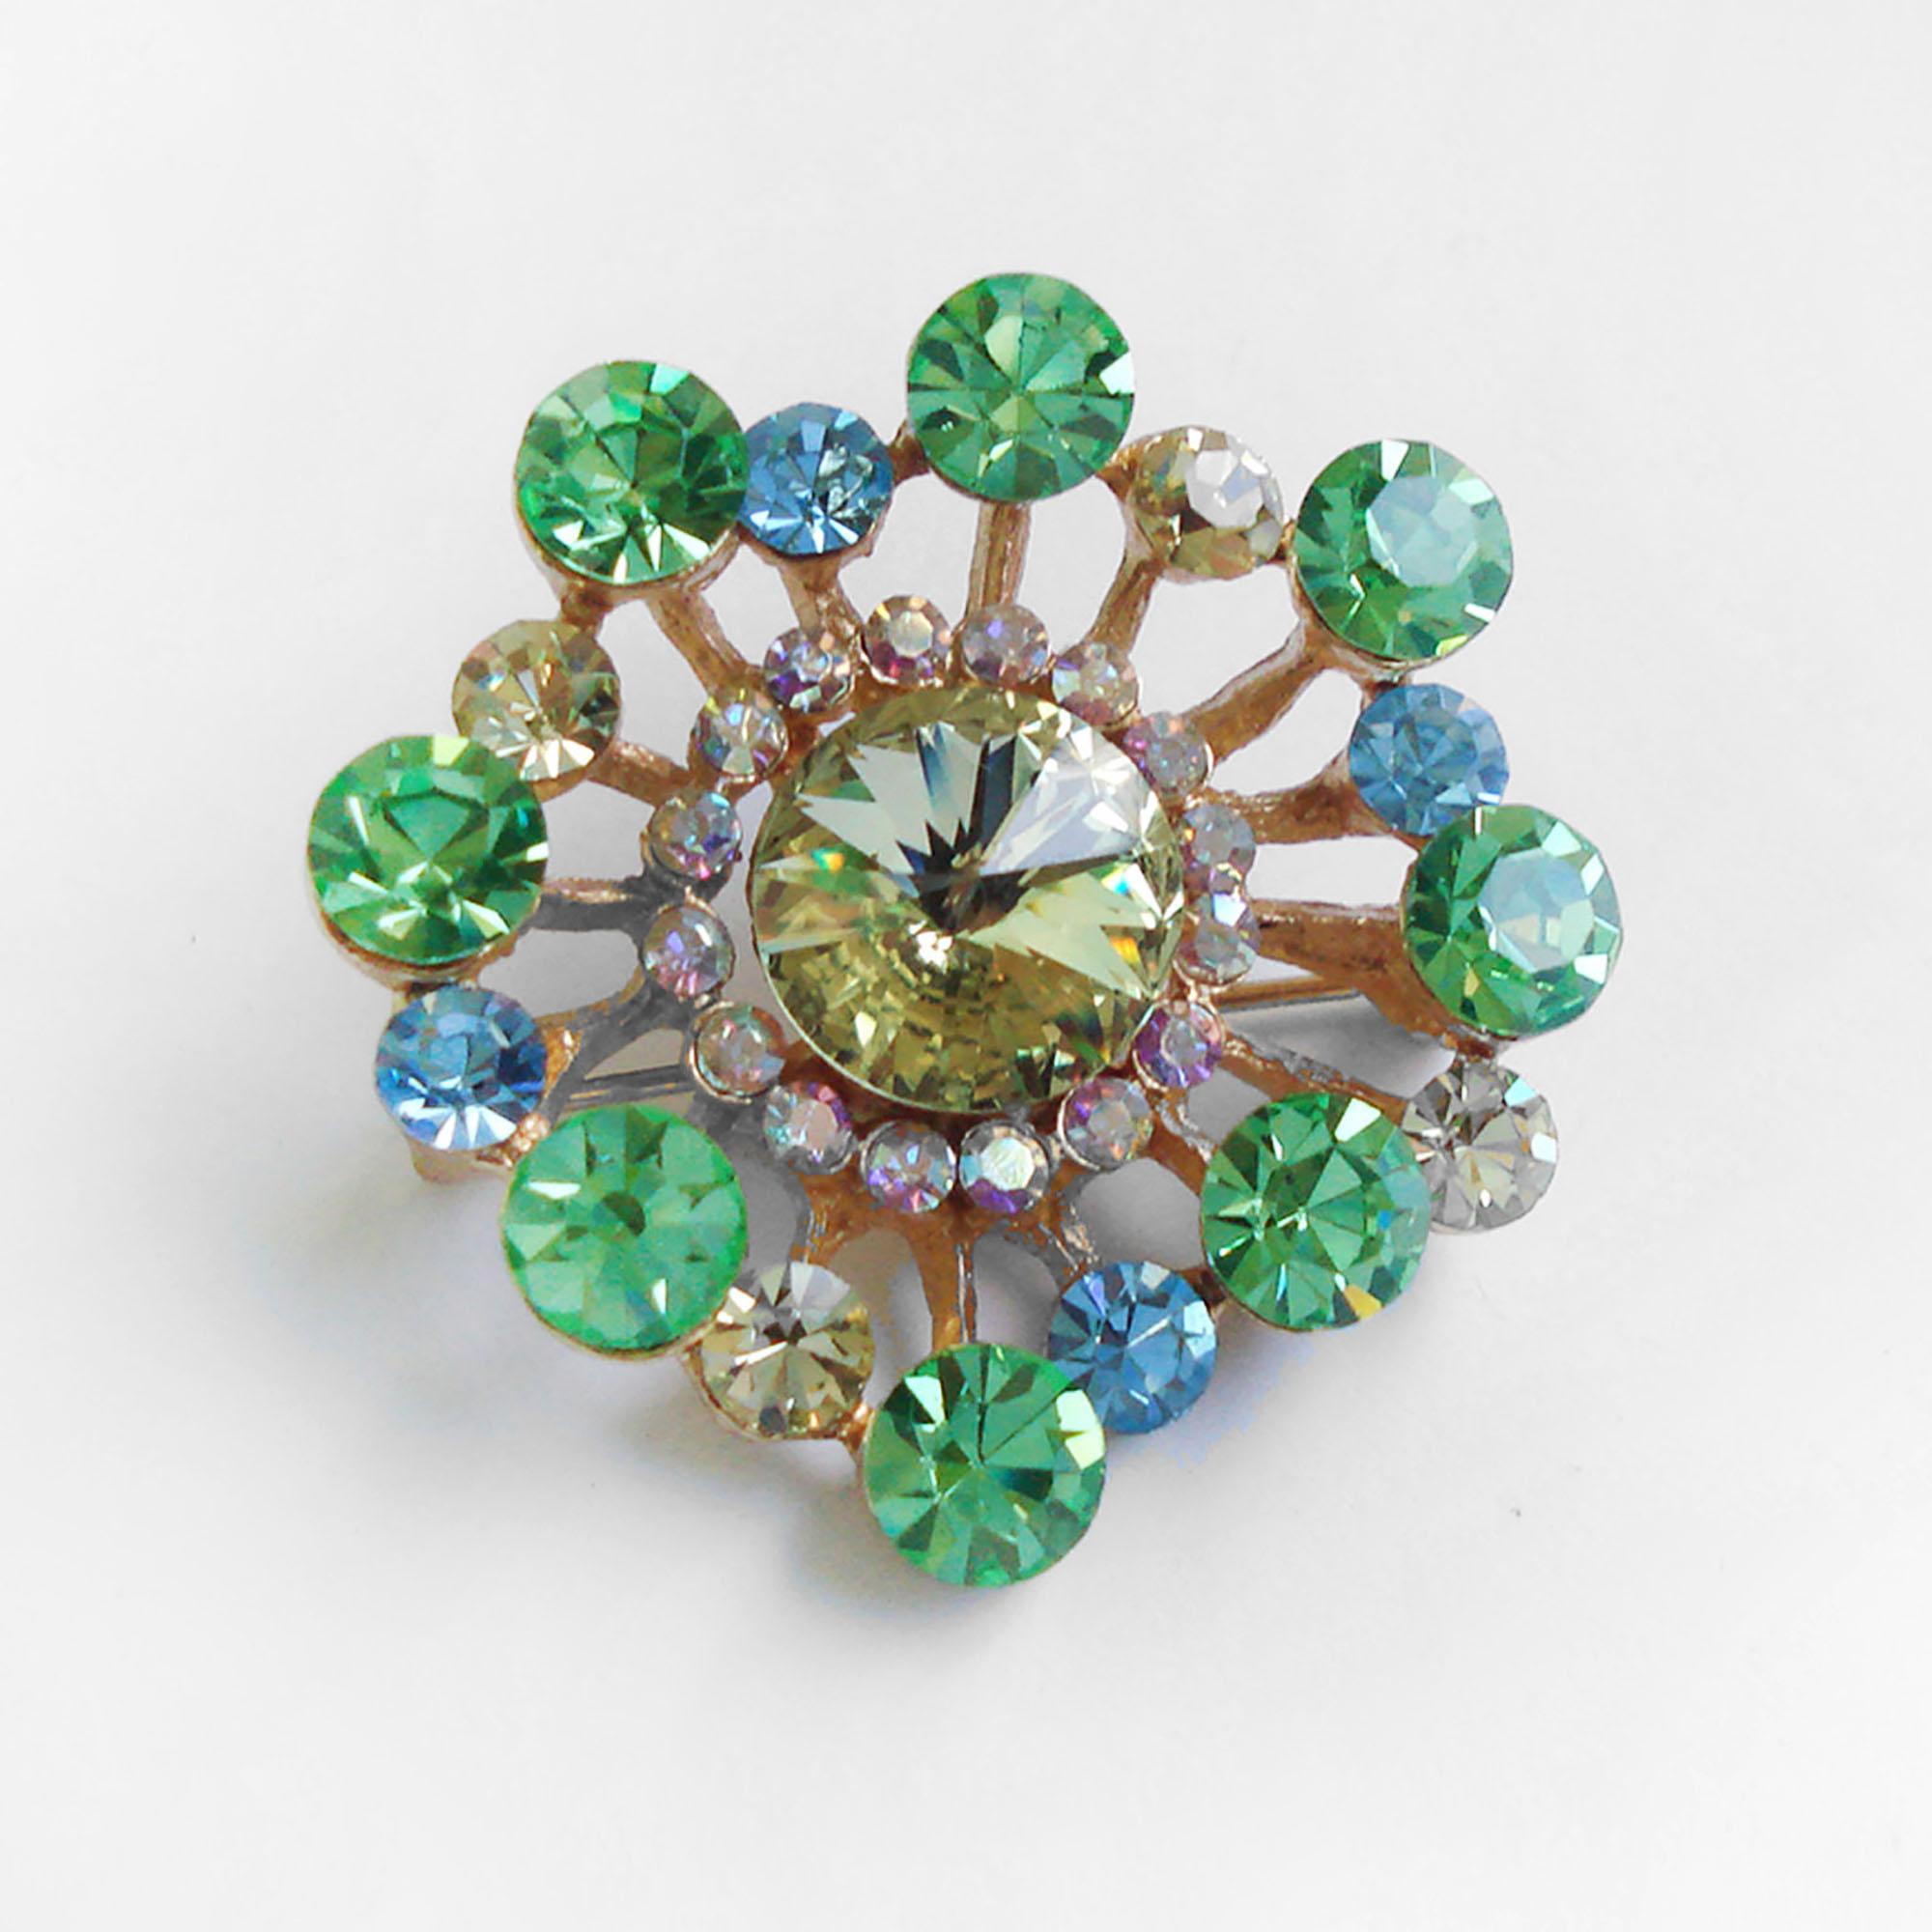 Vintage Guy Laroche Brooch, made of green, blue and clear crystal inserted in a golden structure. Marked on the reverse. 
Condition: Excellent condition.
Materials and Techniques: gilt metal, colored Rhinestones
Marks: Guy Laroche, Paris
Date of